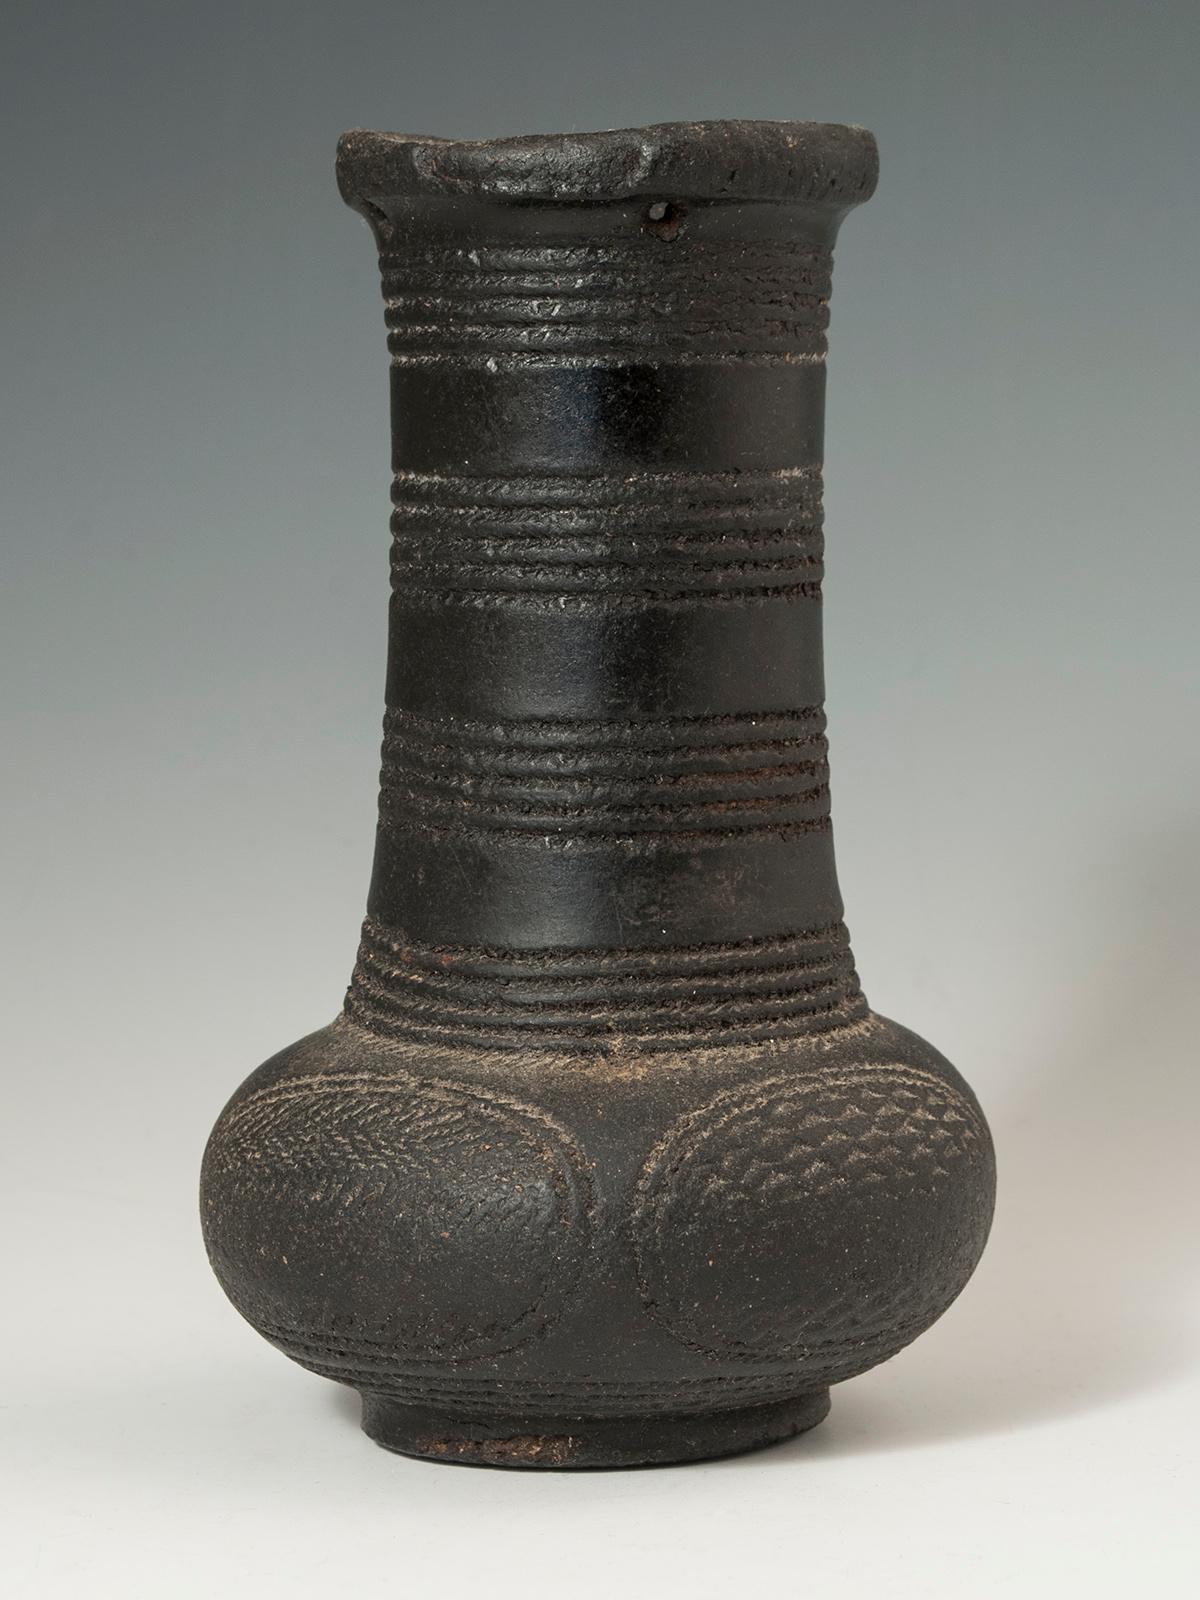 Congolese Early to Mid-20th Century Tribal Terracotta Apothecary Vessel, D.R. Congo